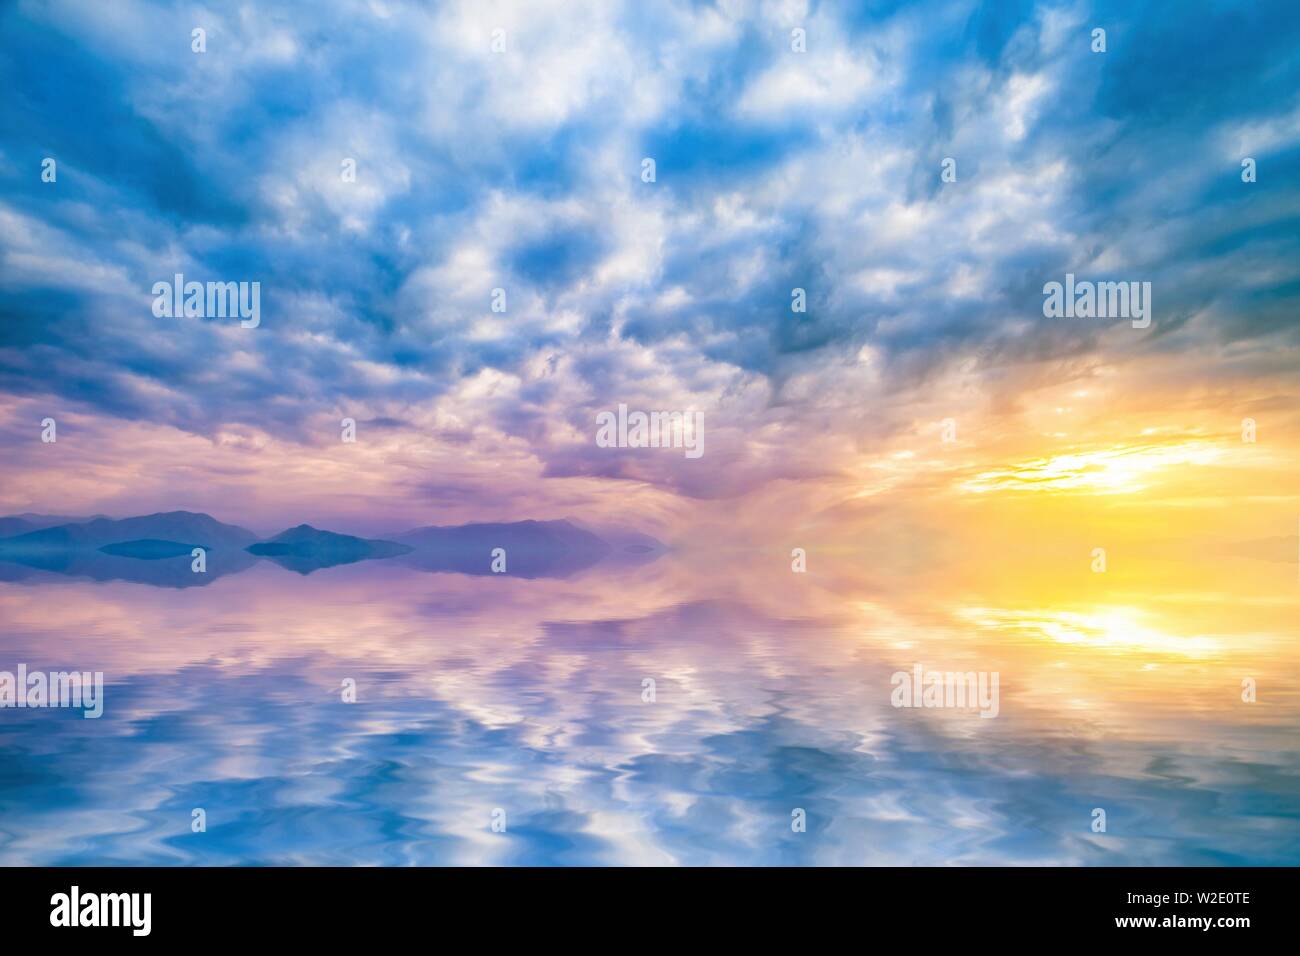 natural landscape with cloudy sky at sunset reflected in water Stock Photo